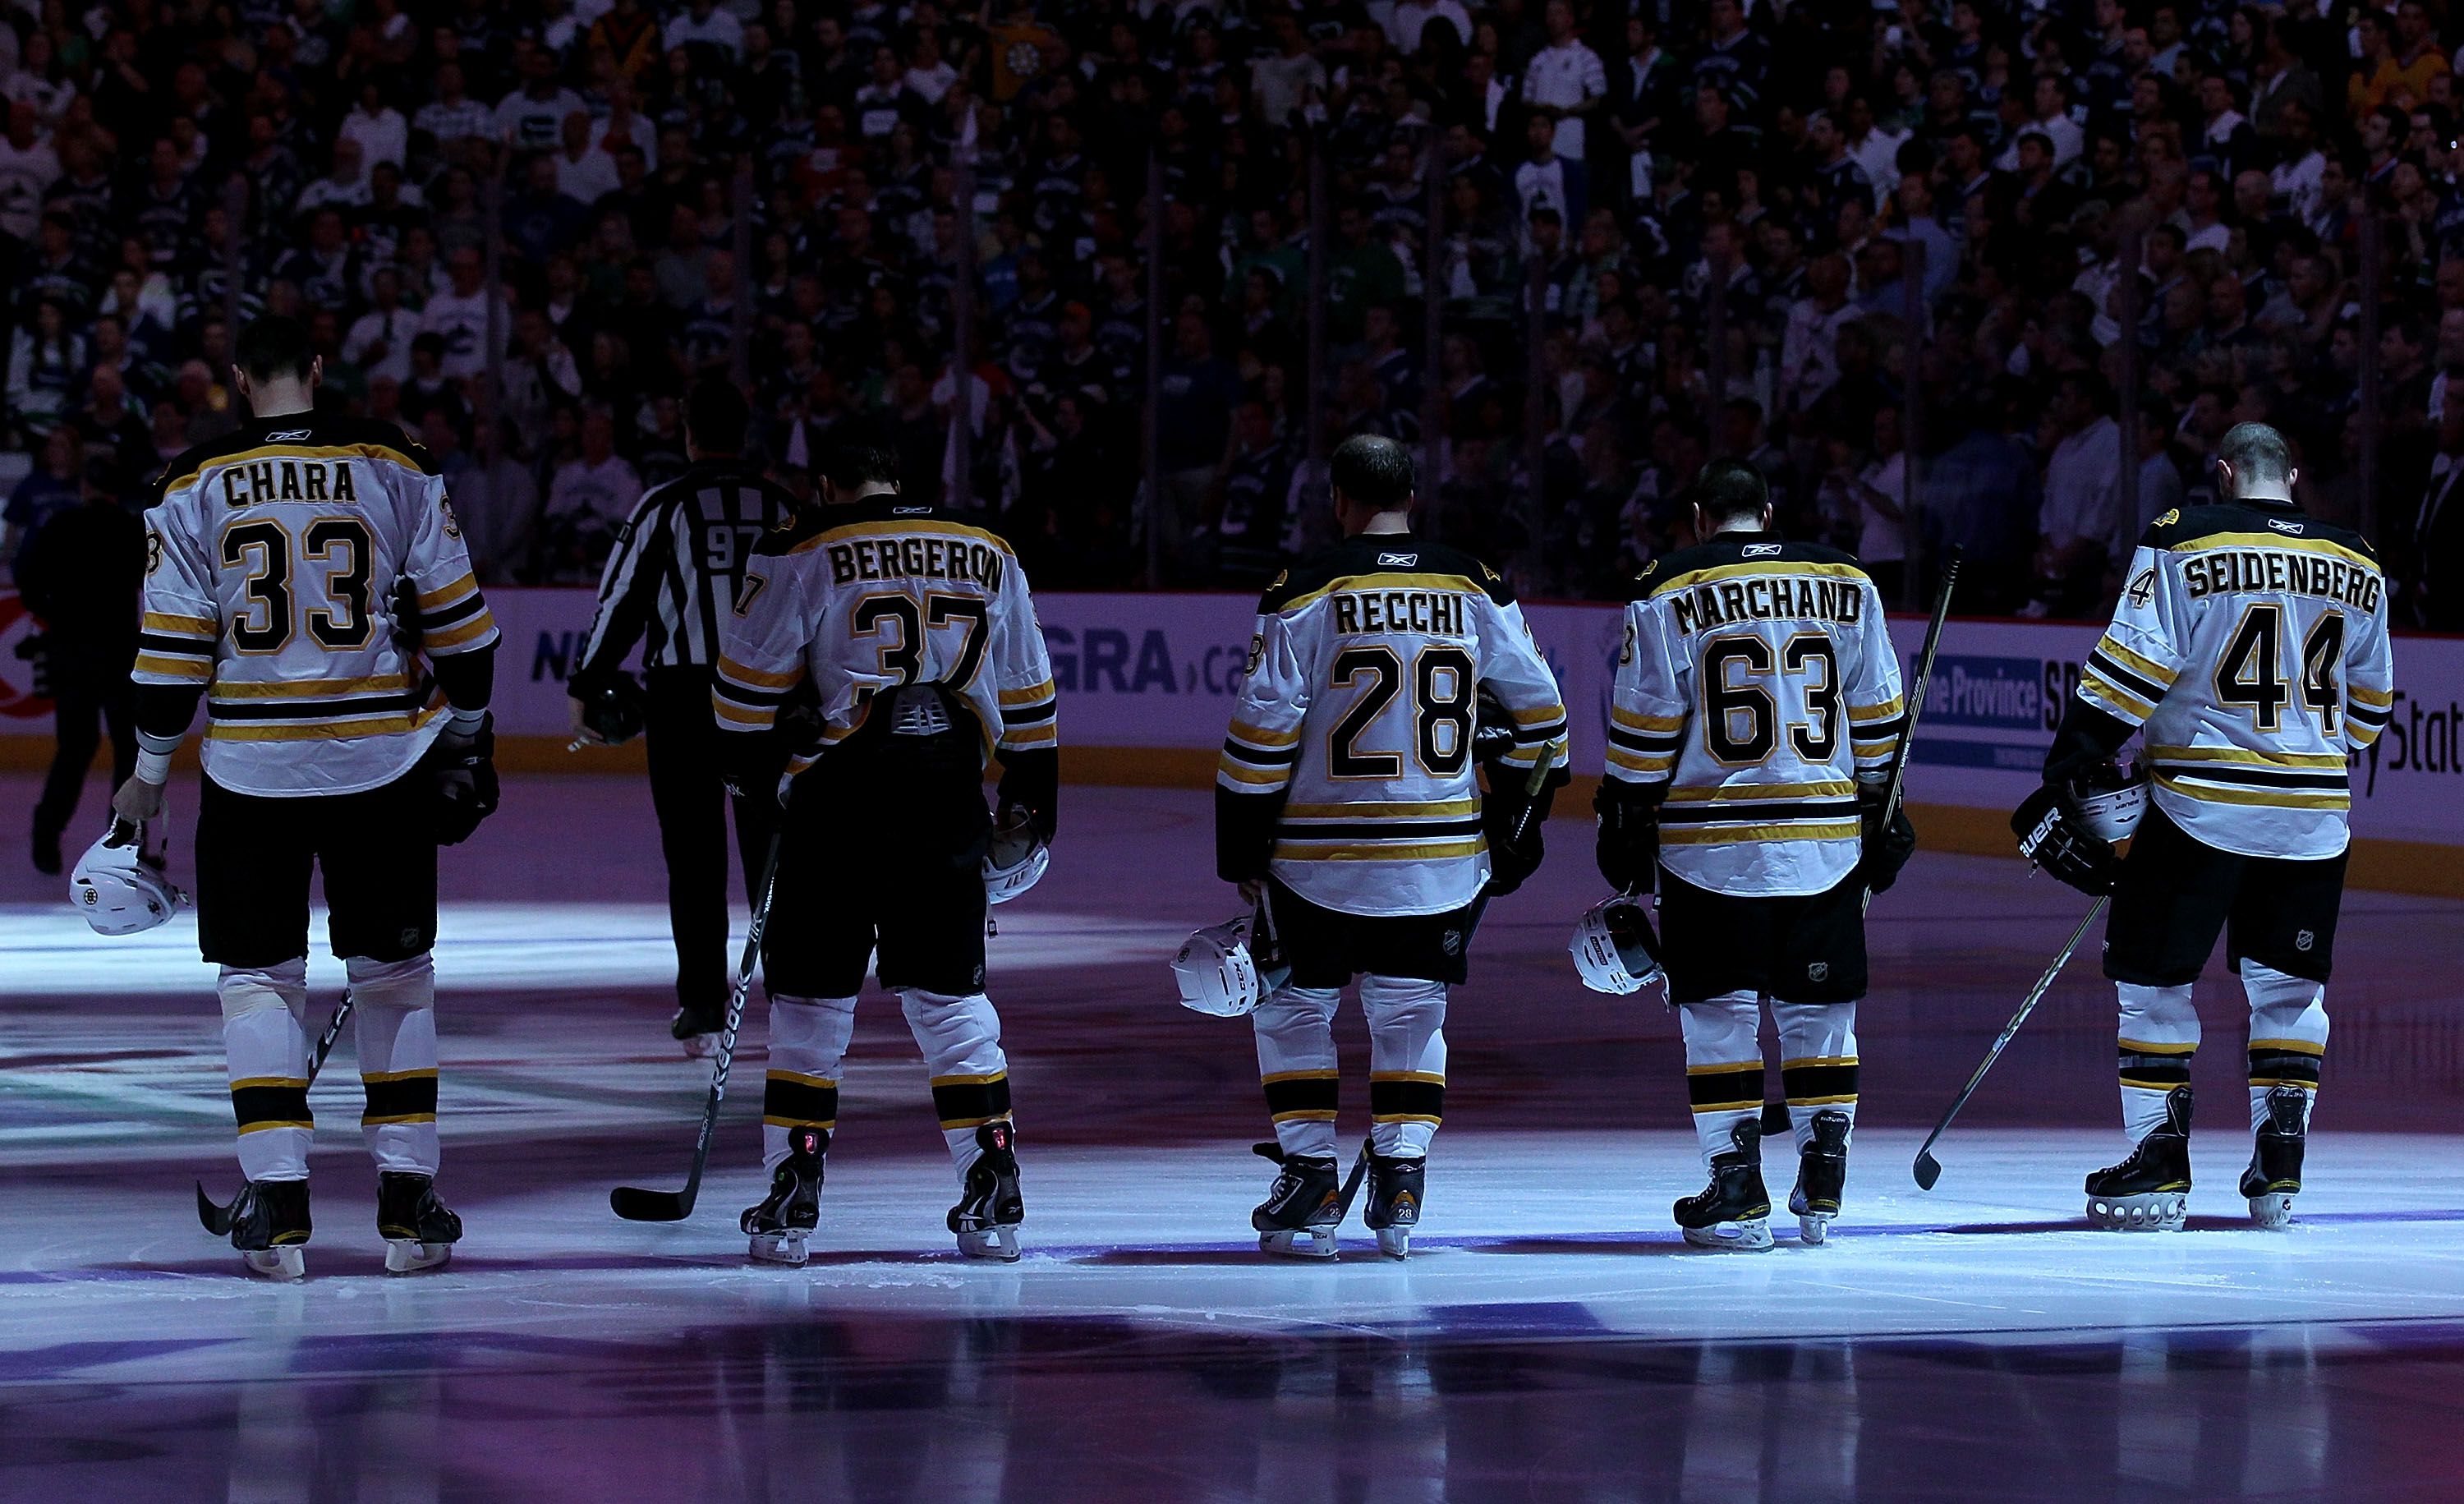 The Most Memorable Boston Bruins Games of the Decade - Games 10-6